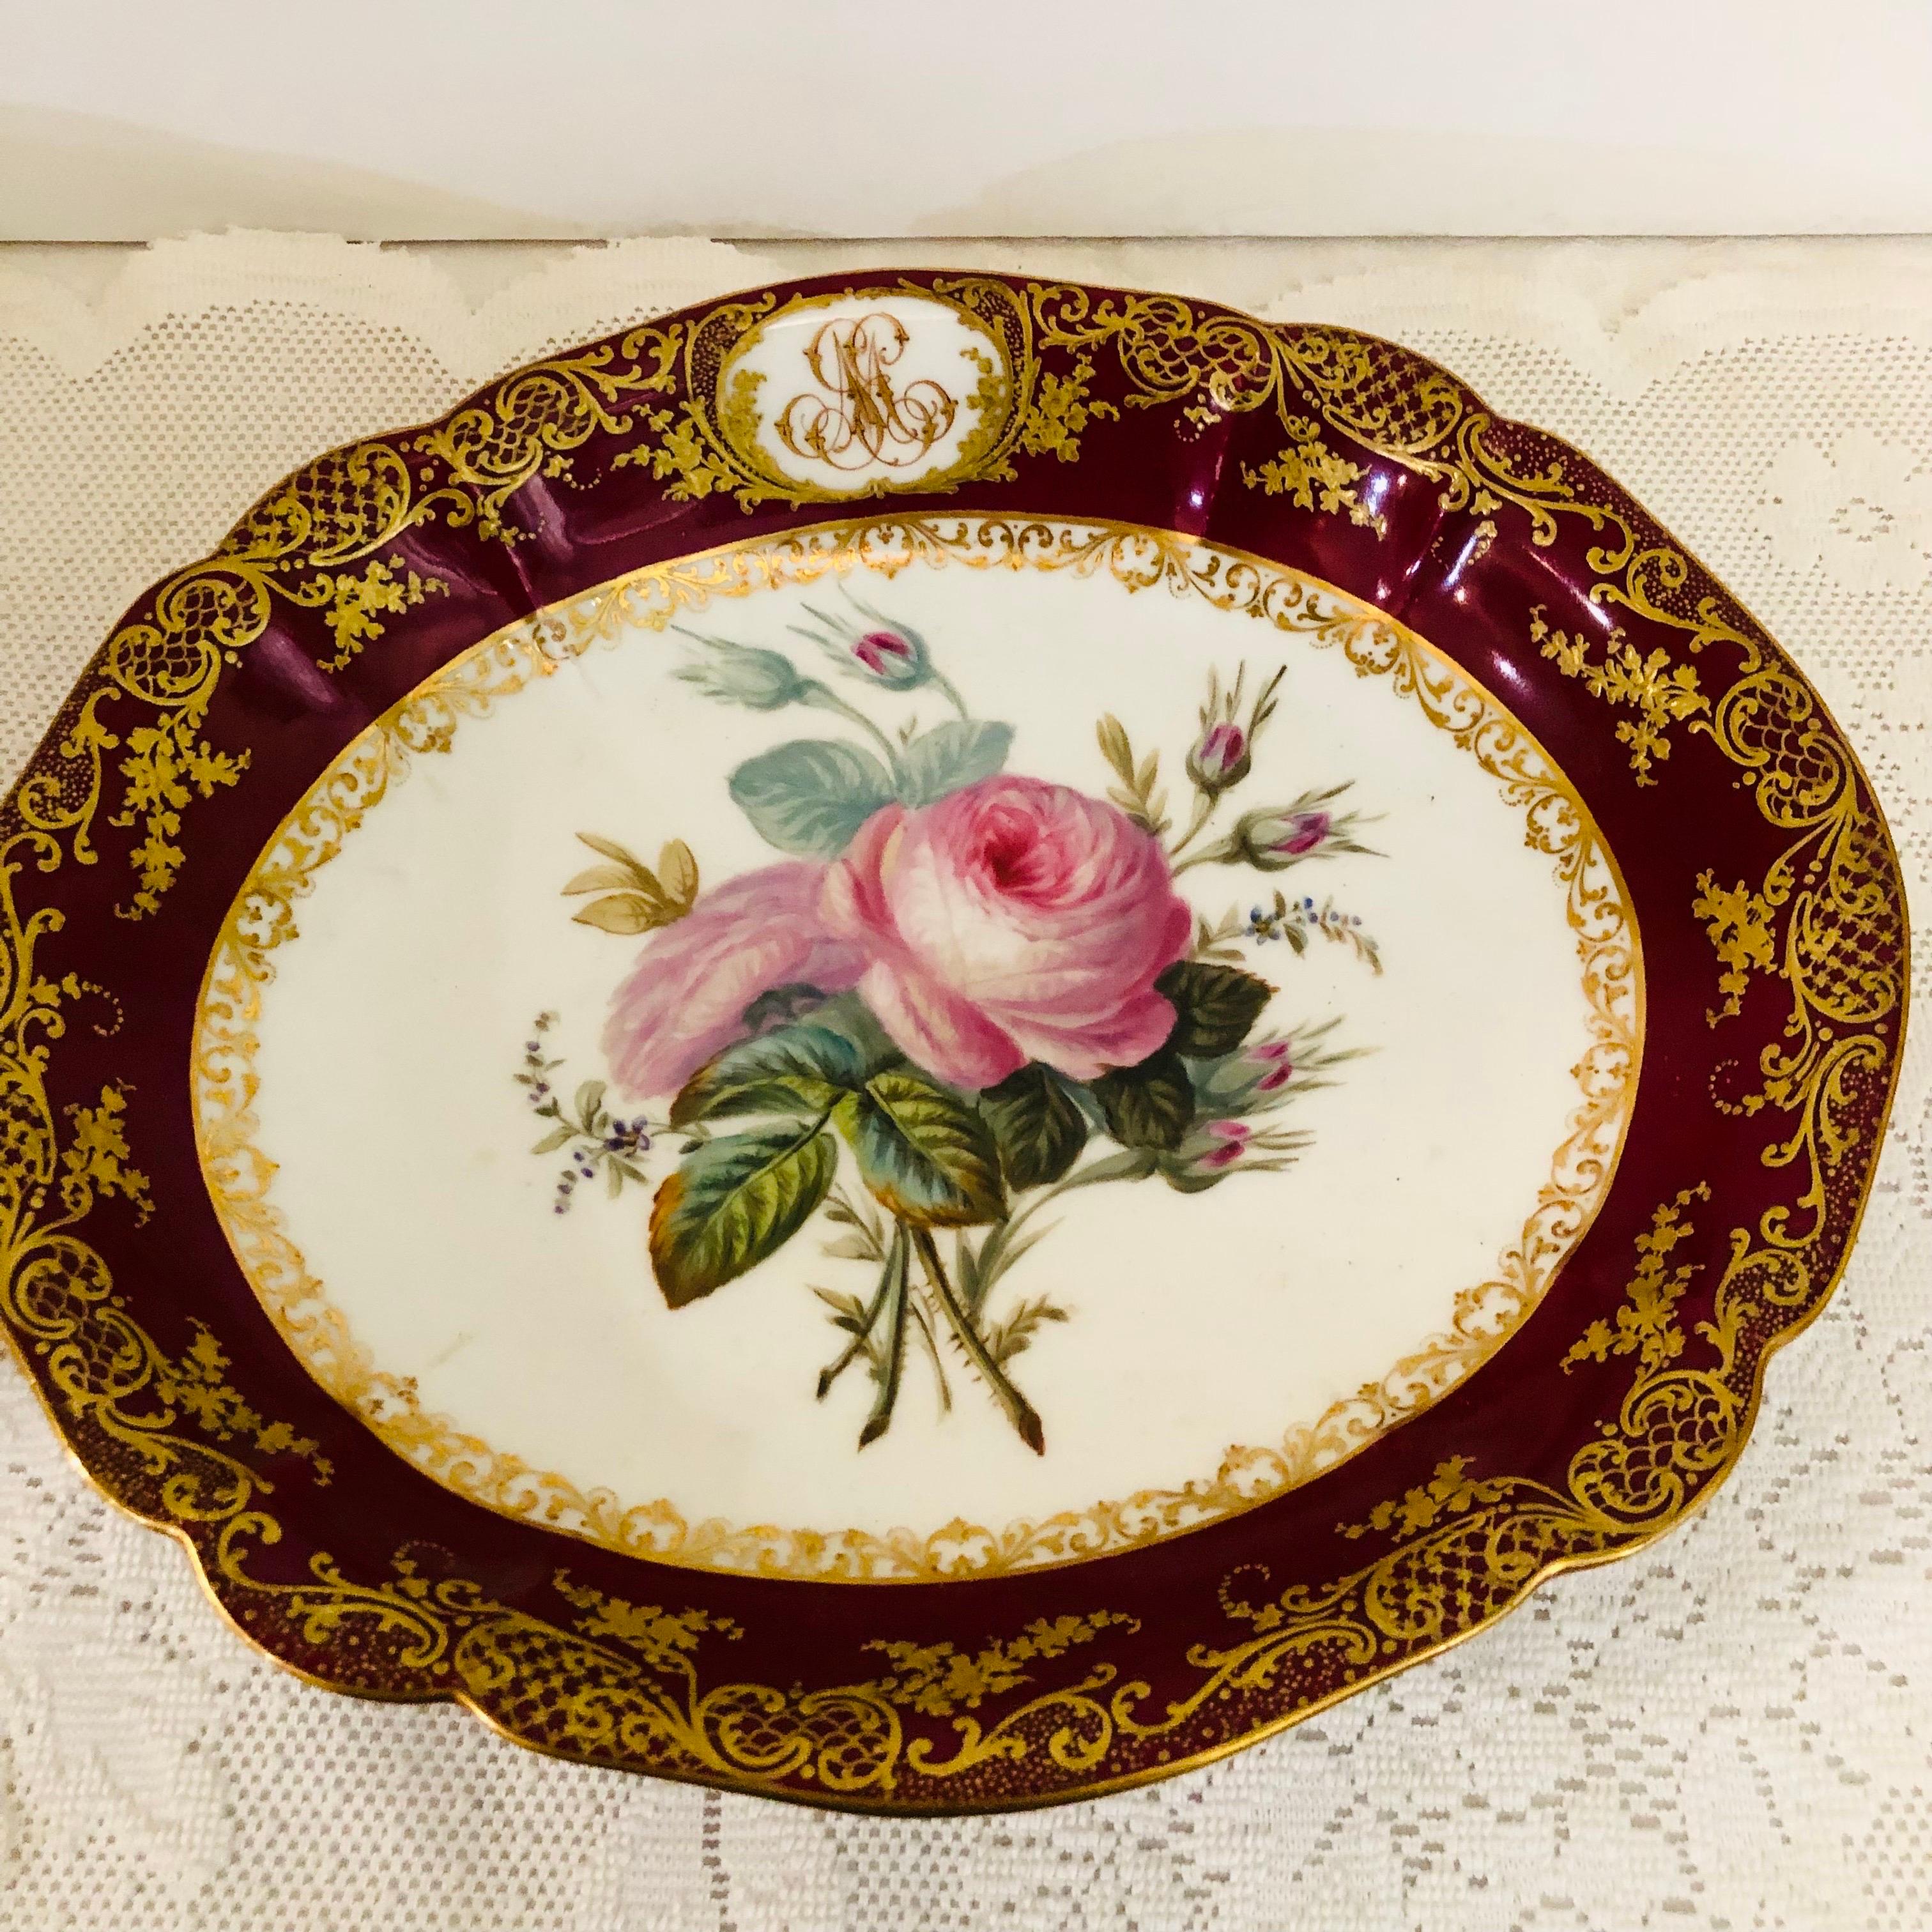 Gilt Old Paris Porcelain Oval Bowl Masterfully Painted With a Bouquet of Pink Roses